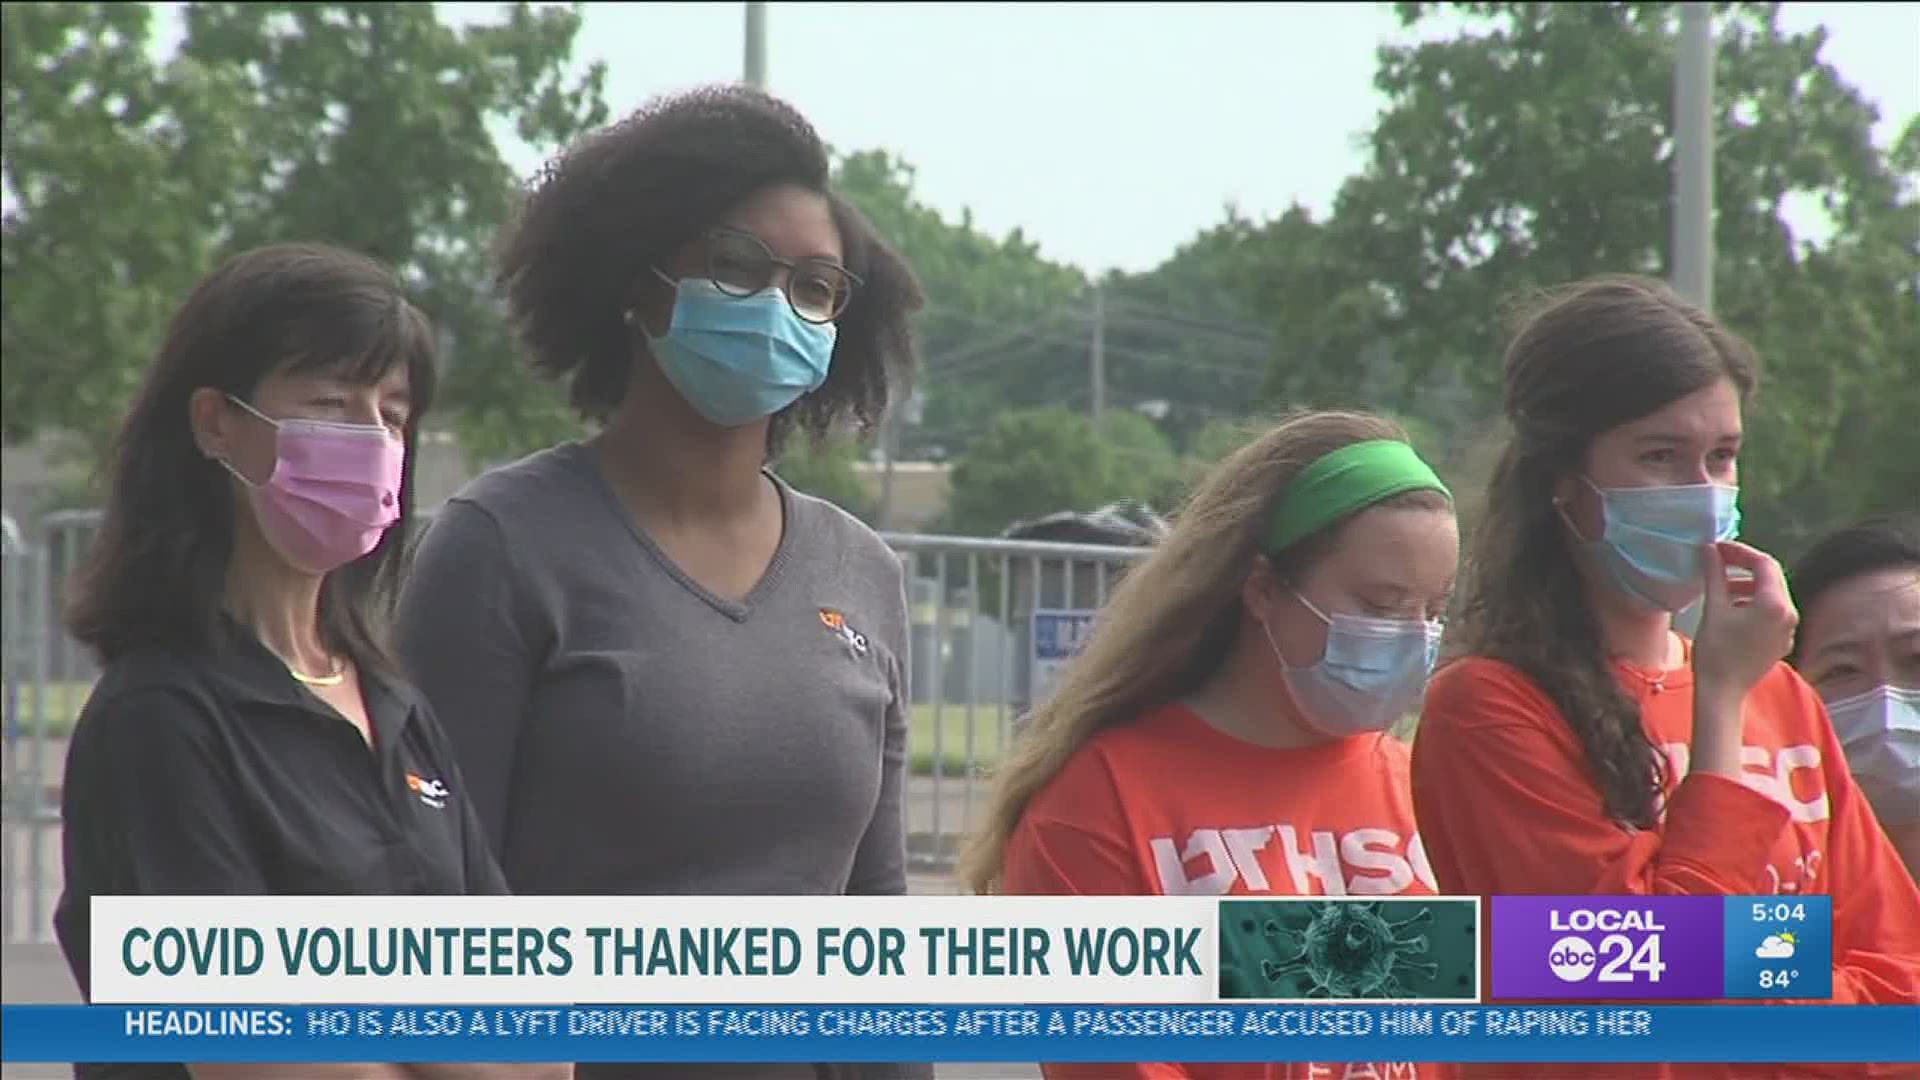 Thursday, Memphis city and Shelby County leaders took the time to thank those volunteers for their work during the pandemic.